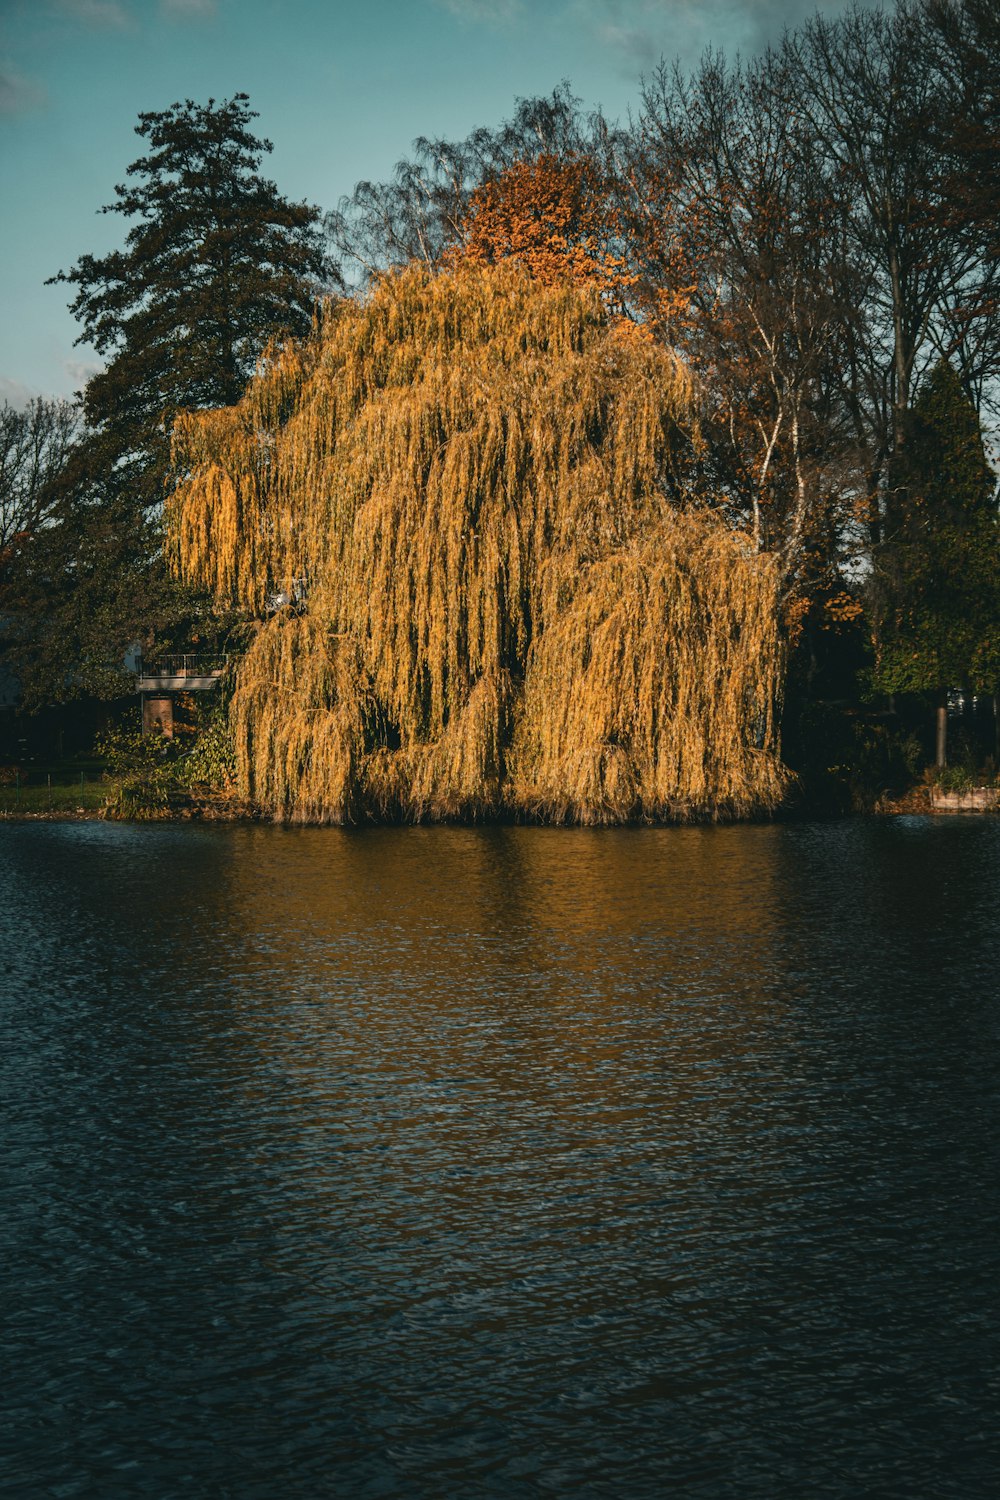 a large willow tree in the middle of a lake